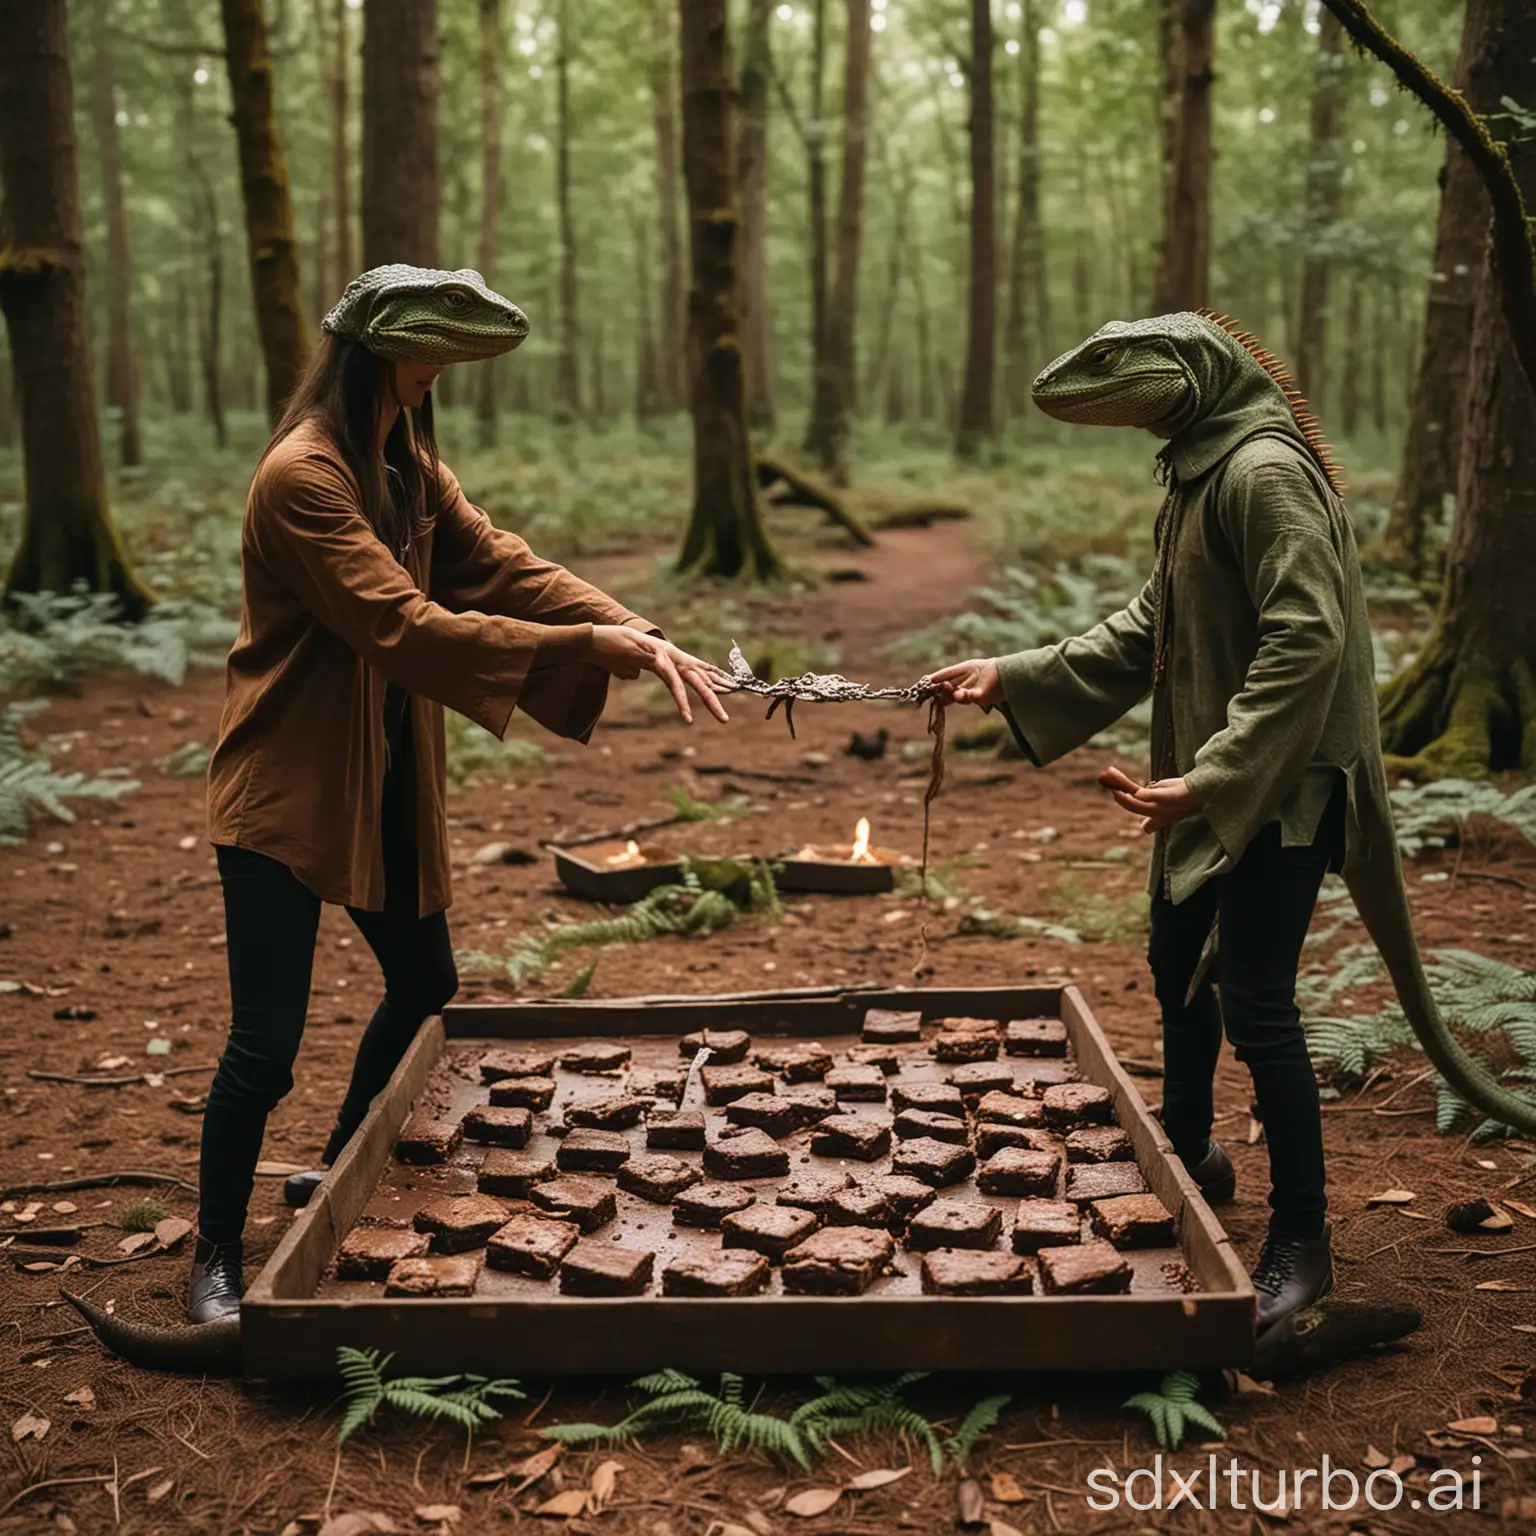 Two friends performing rituals in the forest while dancing around a tray of brownies and there are many lizards